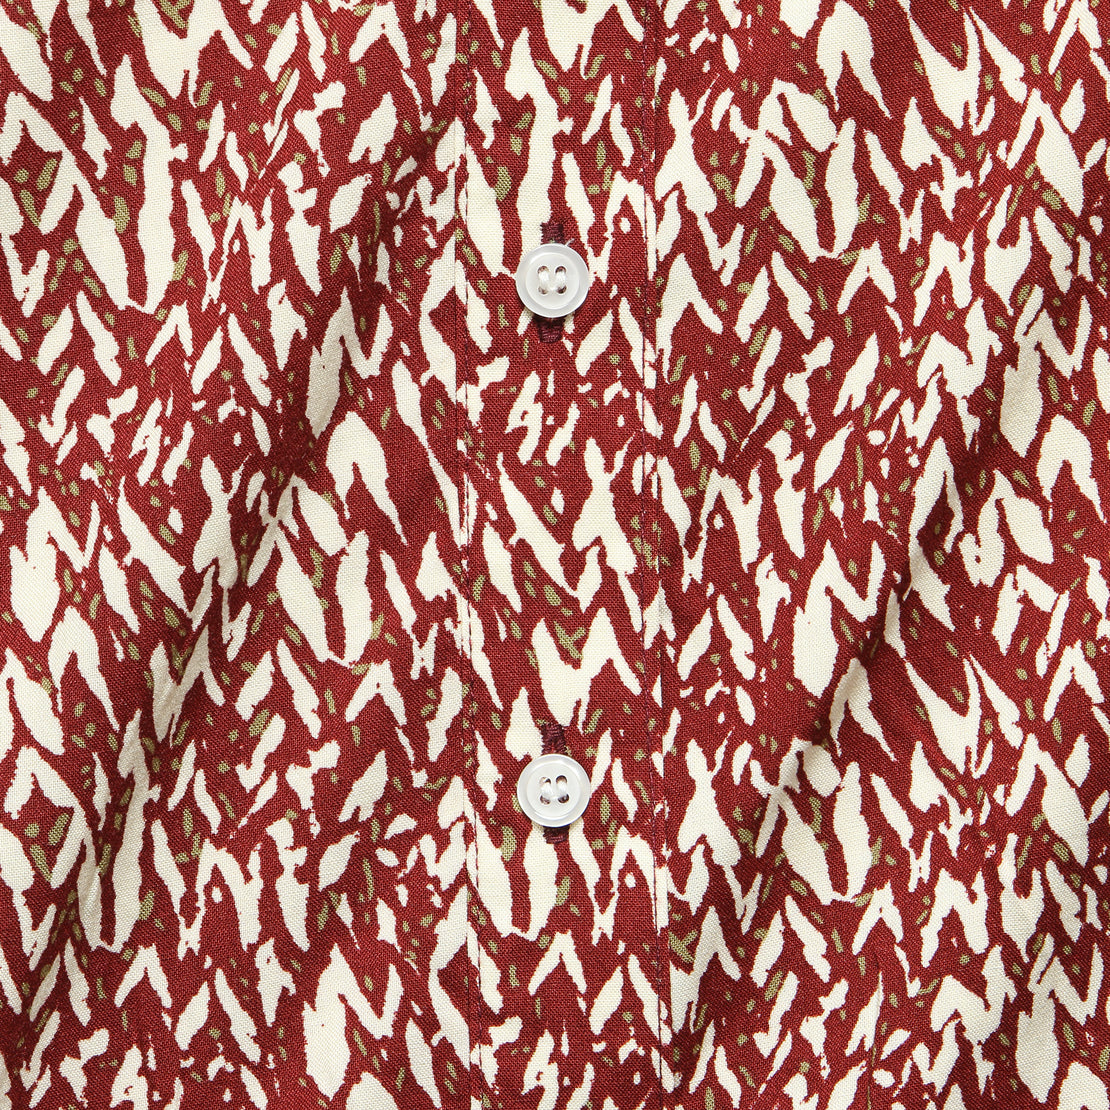 Bea Top - Red Print - Bridge & Burn - STAG Provisions - W - Tops - S/S Woven